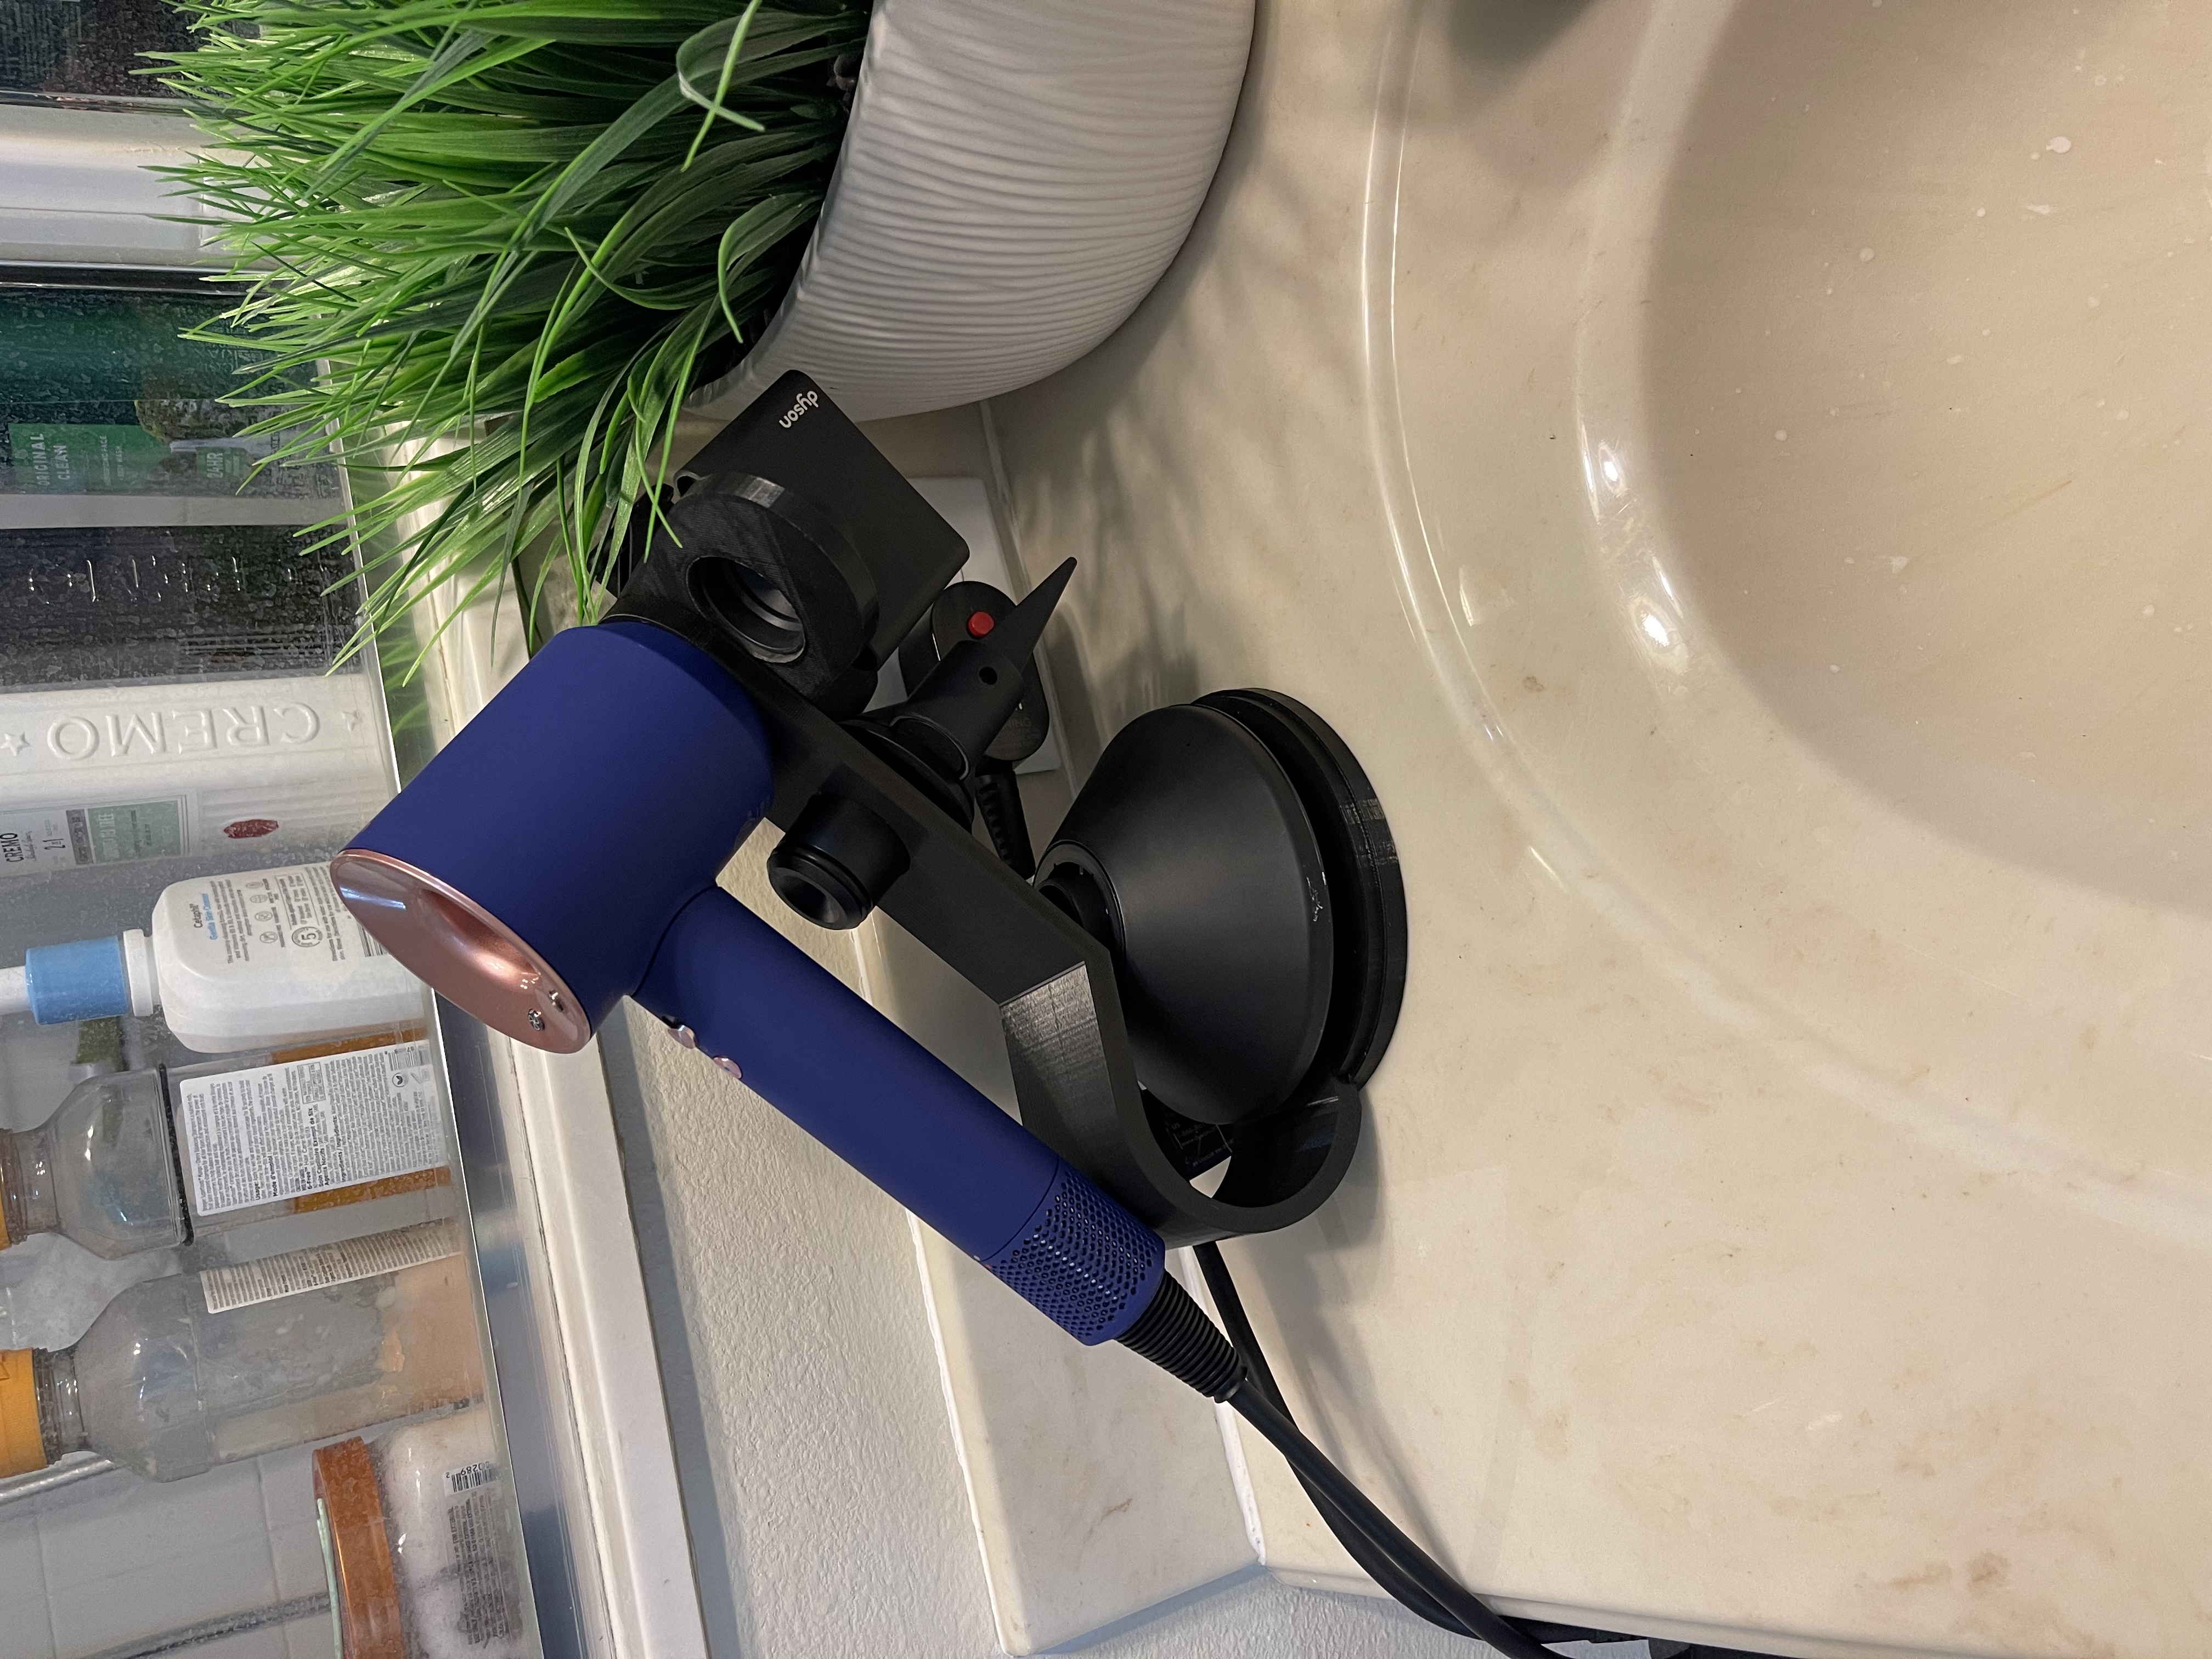 Dyson Hair dryer stand attachment by Makes_by_Jake, Download free STL  model